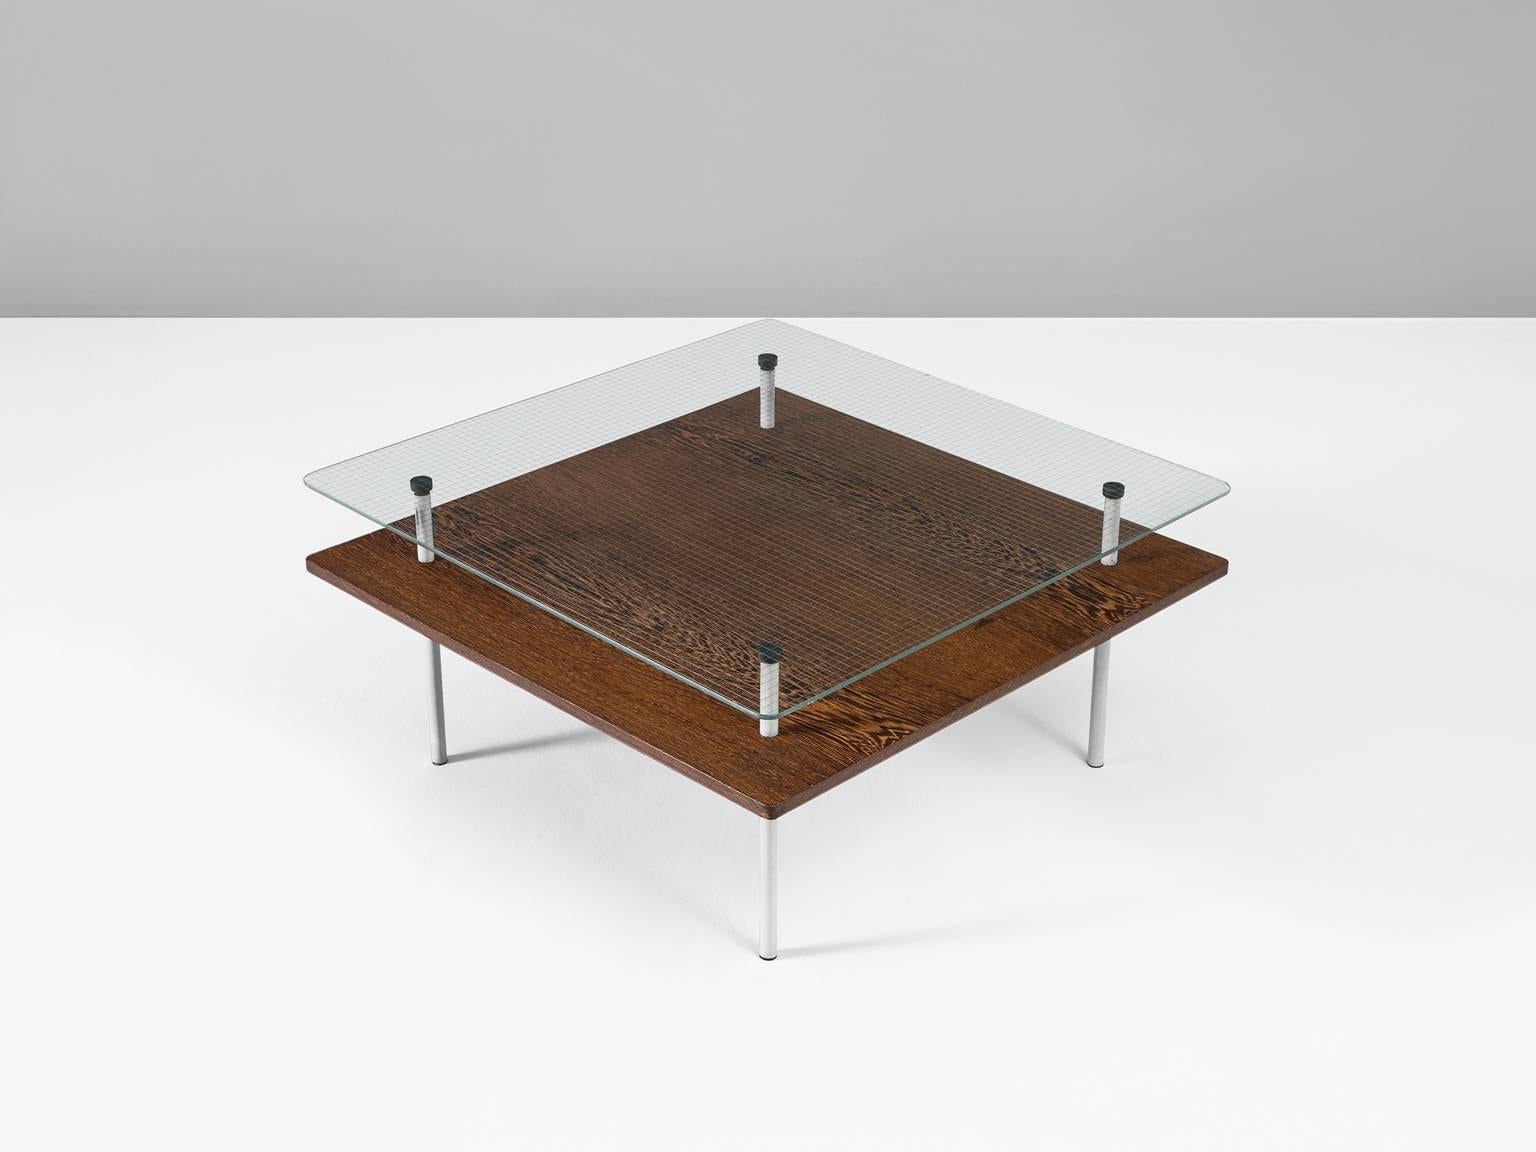 Coffee table in wengé metal and glass by Elmar Berkovich for Metz & Co., the Netherlands, circa 1935.

Modern cocktail table by designer Elmar Berkovich for the Dutch company Metz & Co. An interesting combination of materials is used to make this